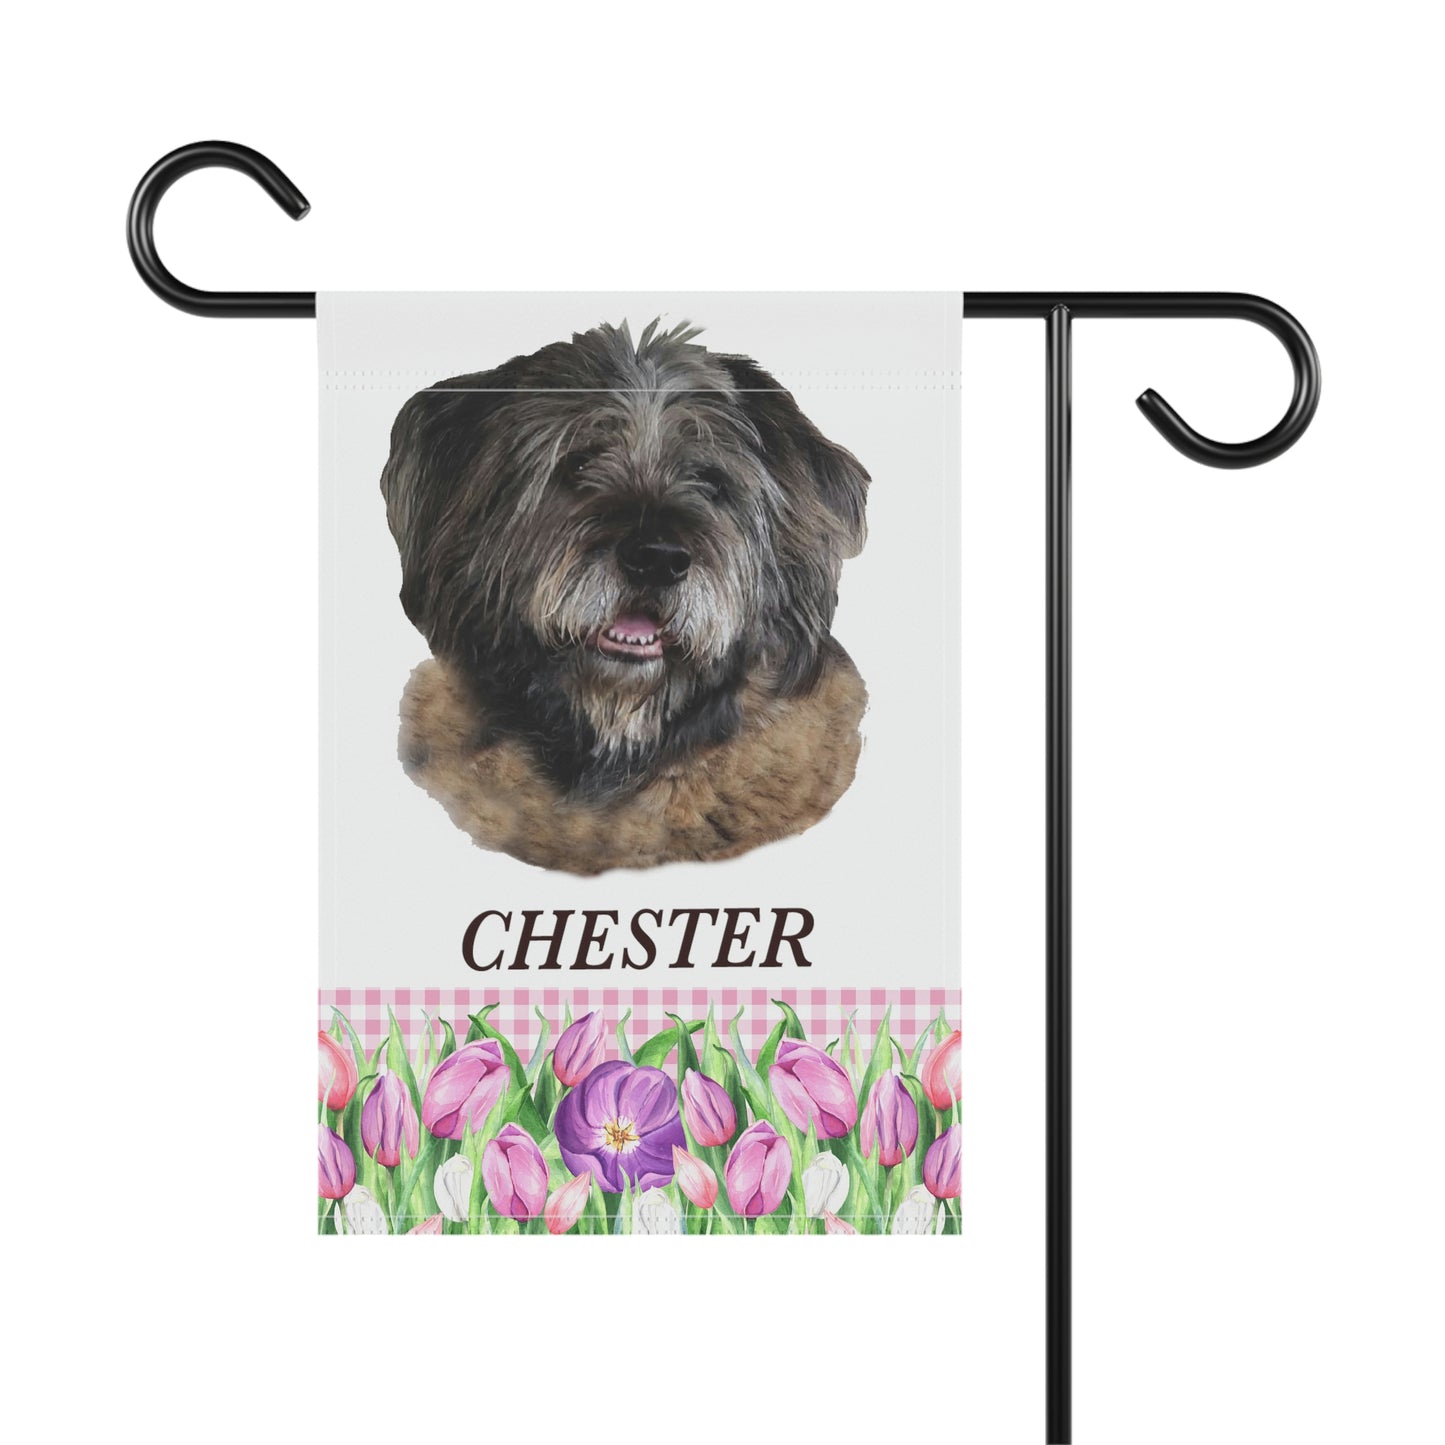 Your Pet's Photo Here!  Garden & House Banner